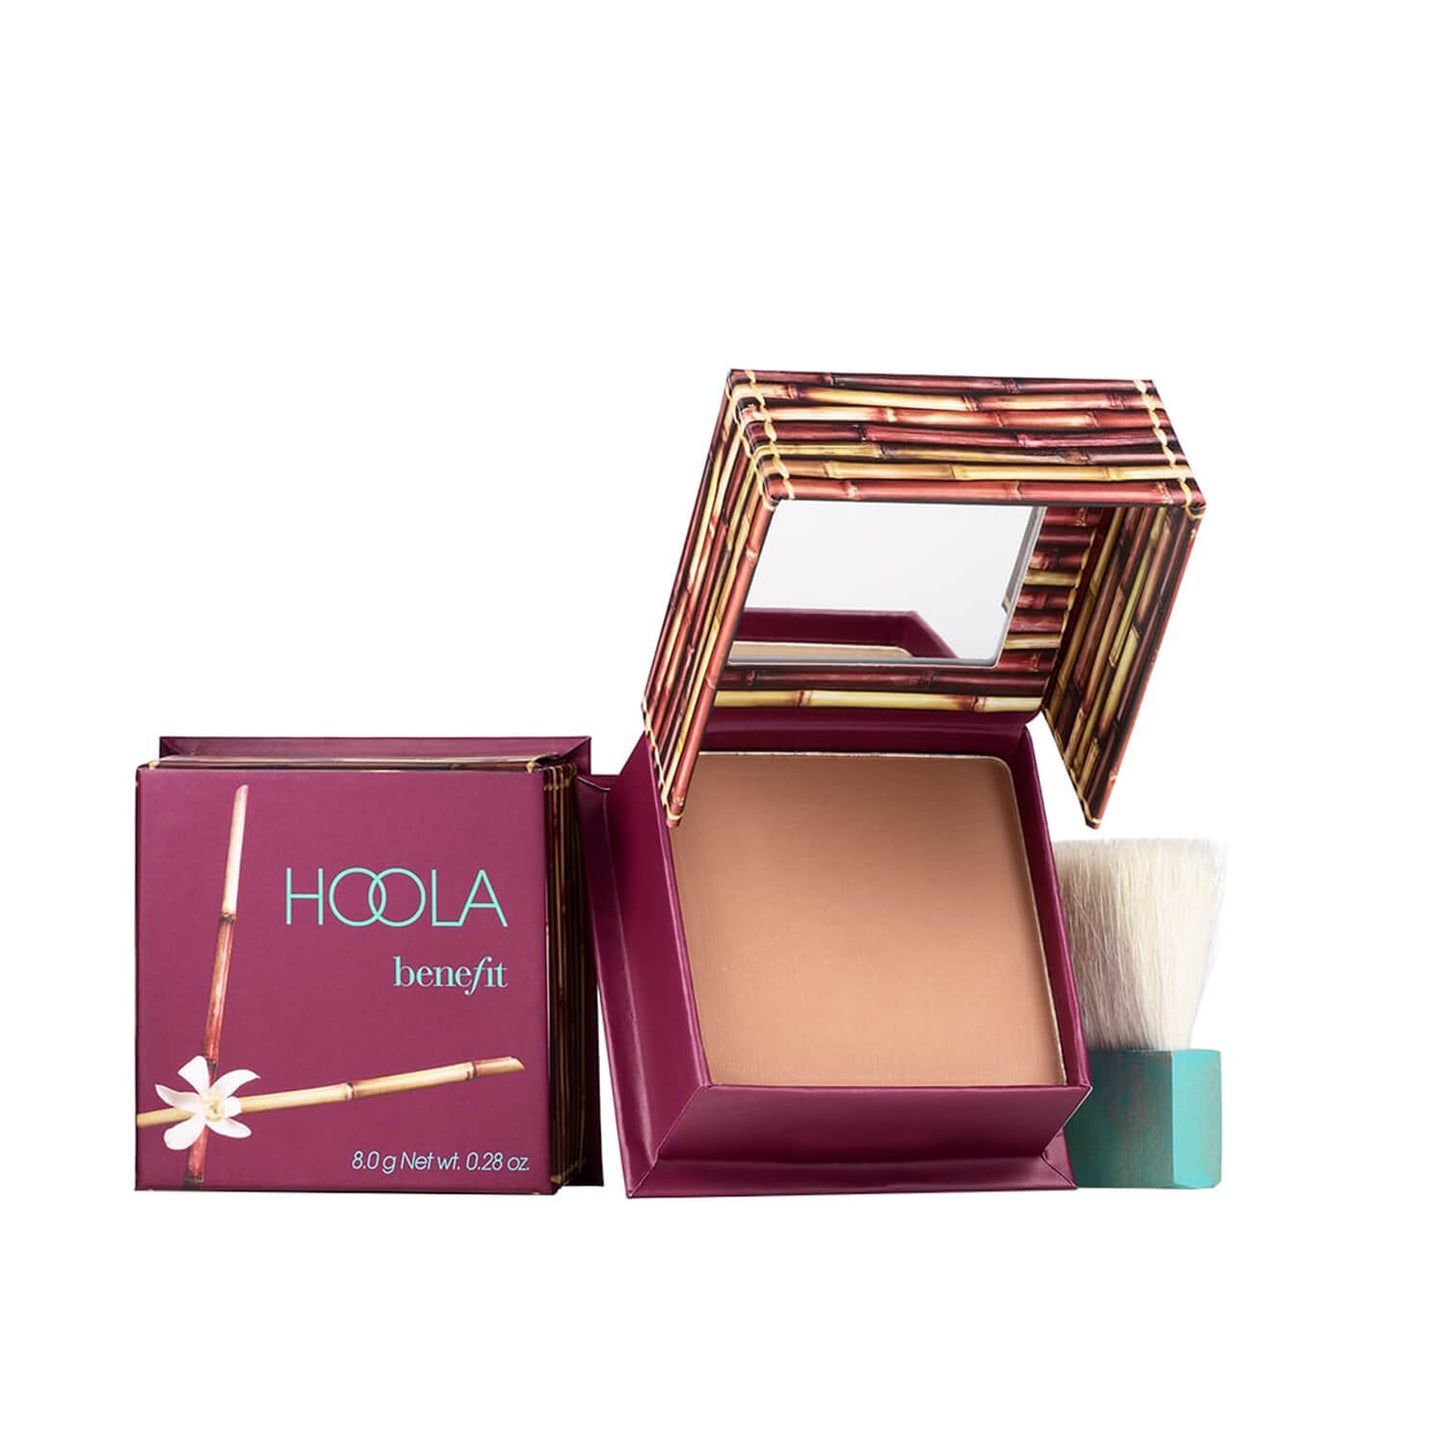 Benefit Hoola Bronzer available at Heygirl.pk for delivery in Karachi, Lahore, Islamabad across Pakistan. 100% original Benefit Cosmetics Bronzer available for delivery in Pakistan.